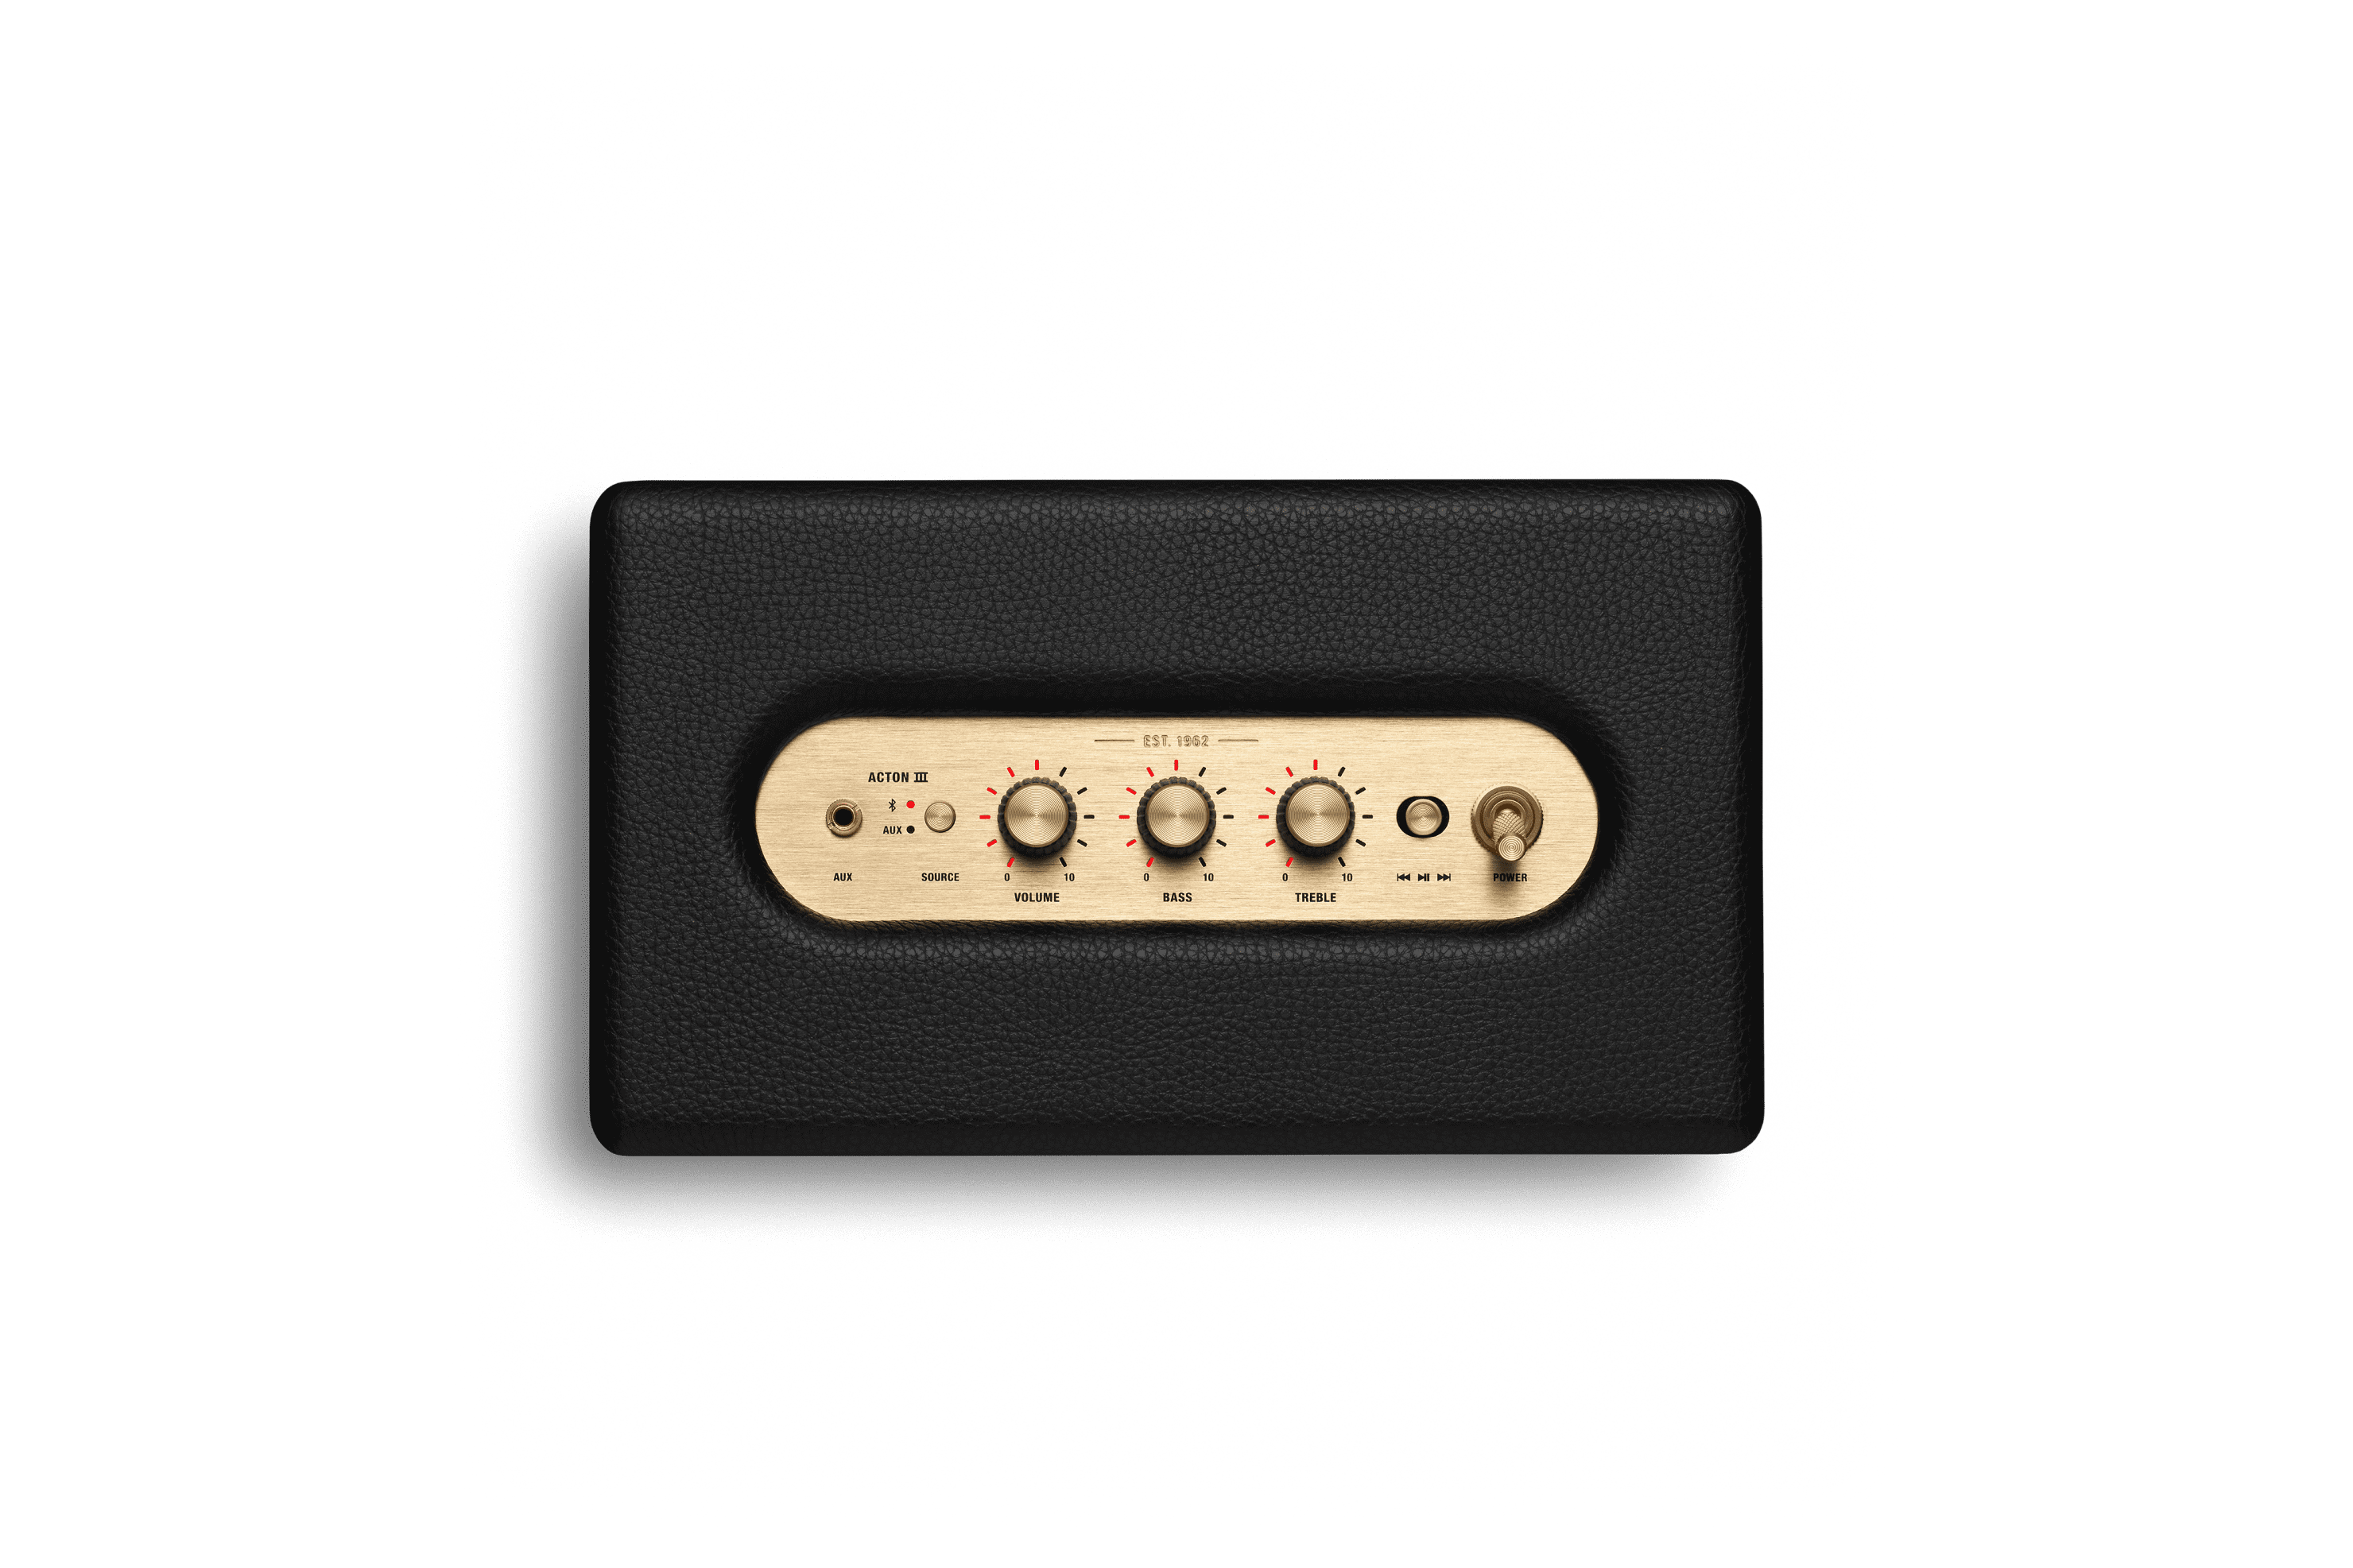 Marshall Stanmore III Review: Vintage Style Meets Modern Sound